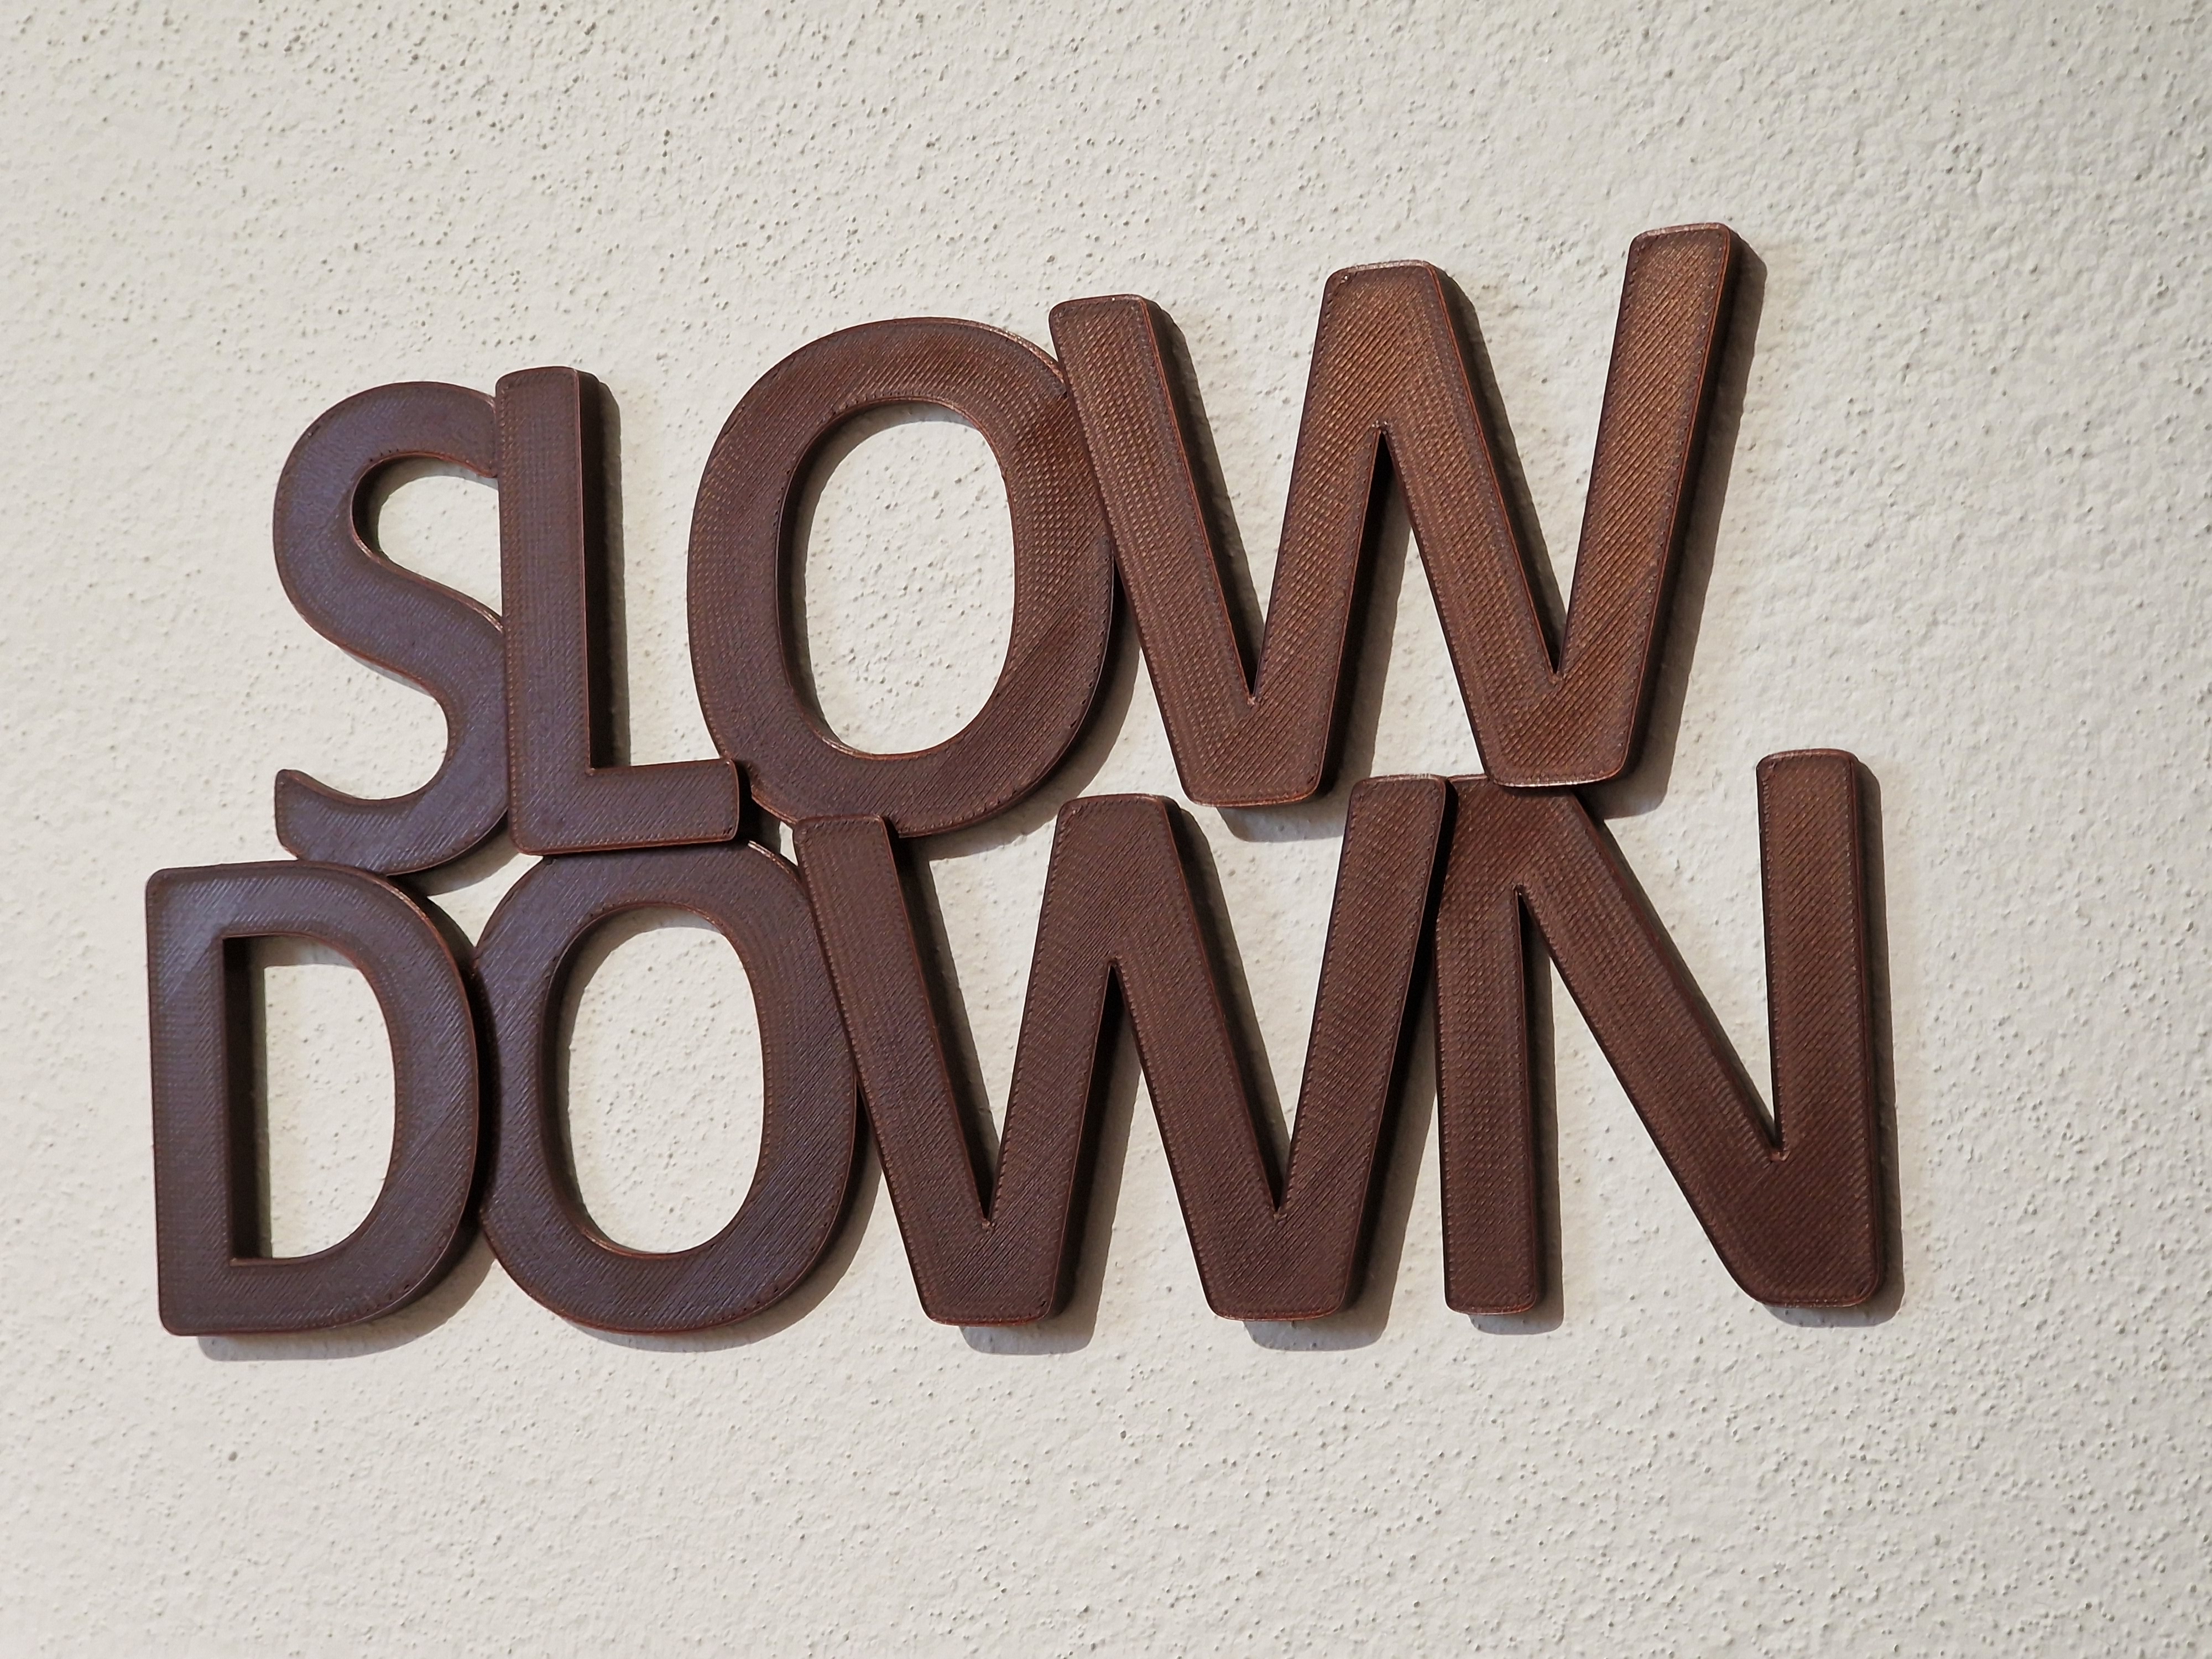 Sign "Slow Down"